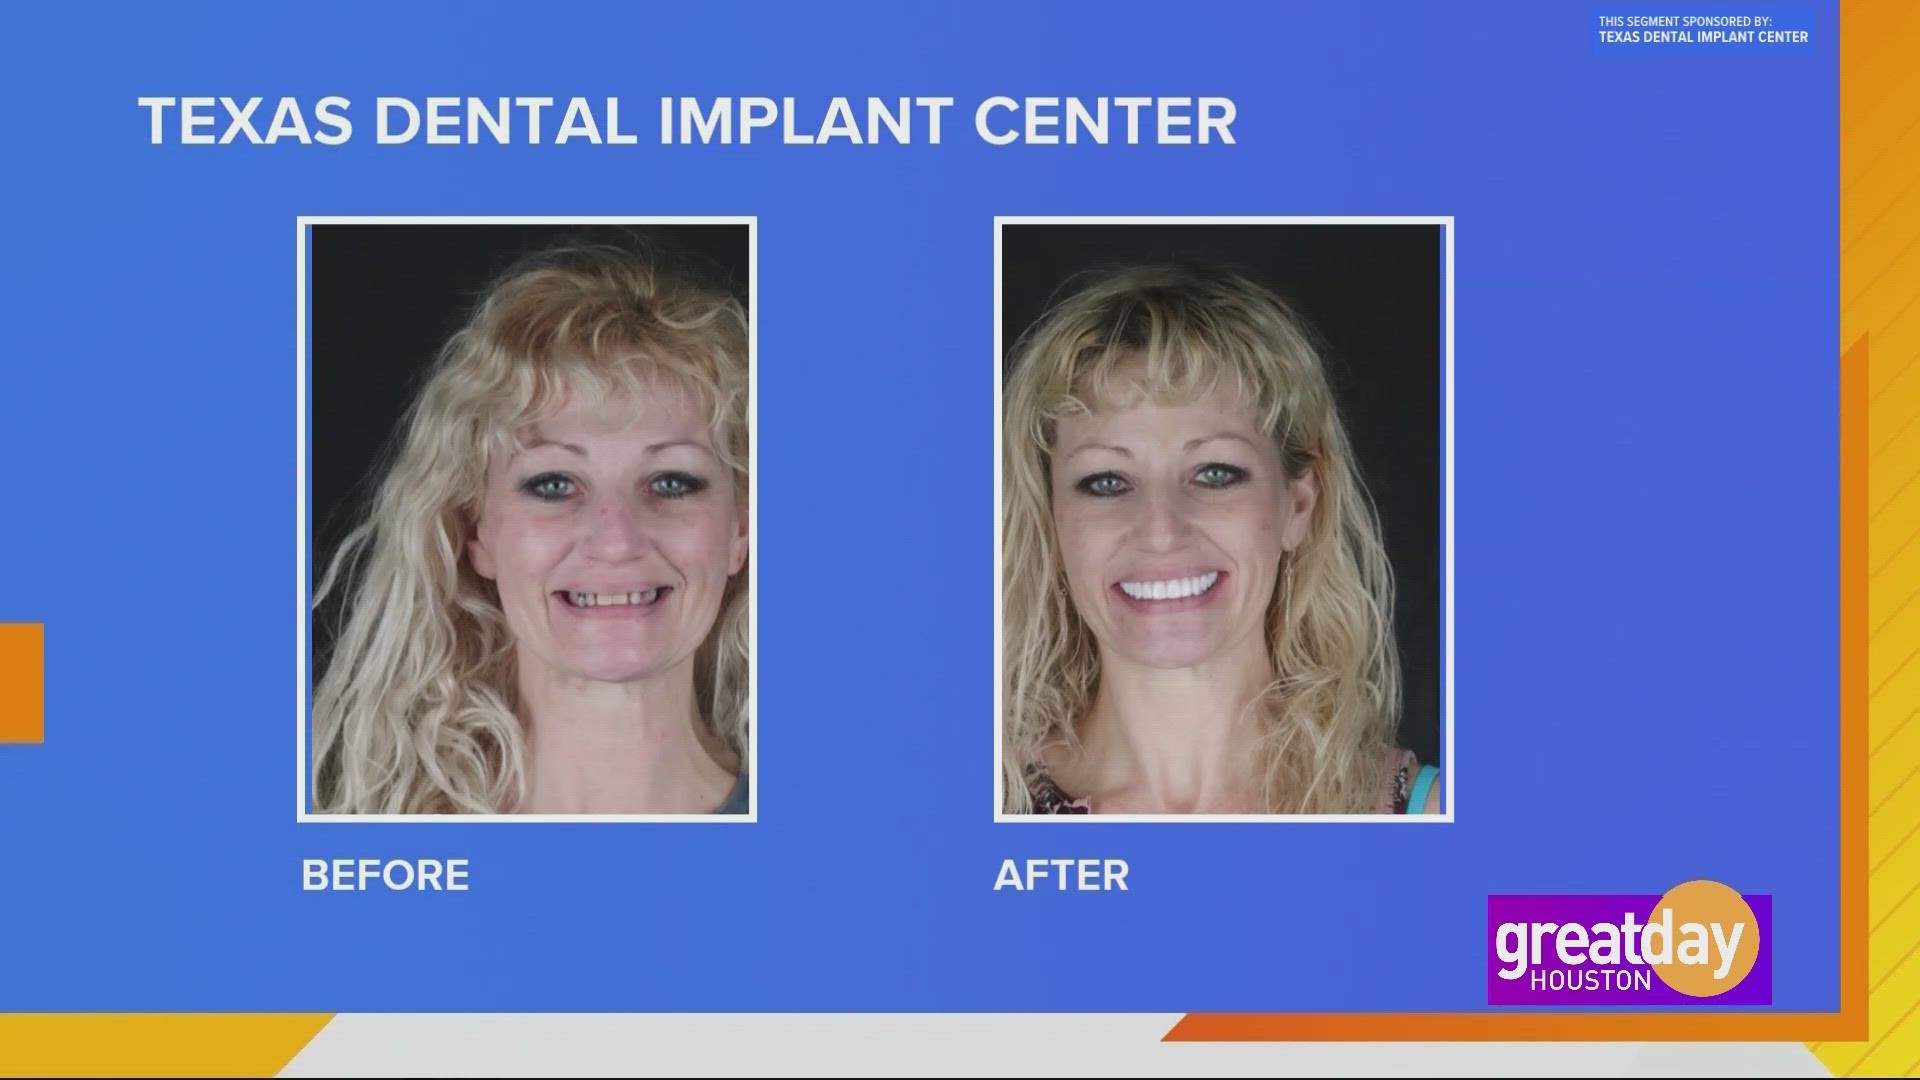 Many people experience missing or broken teeth as they age. A trip to Texas Dental Implant Center can help transform your smile for good!